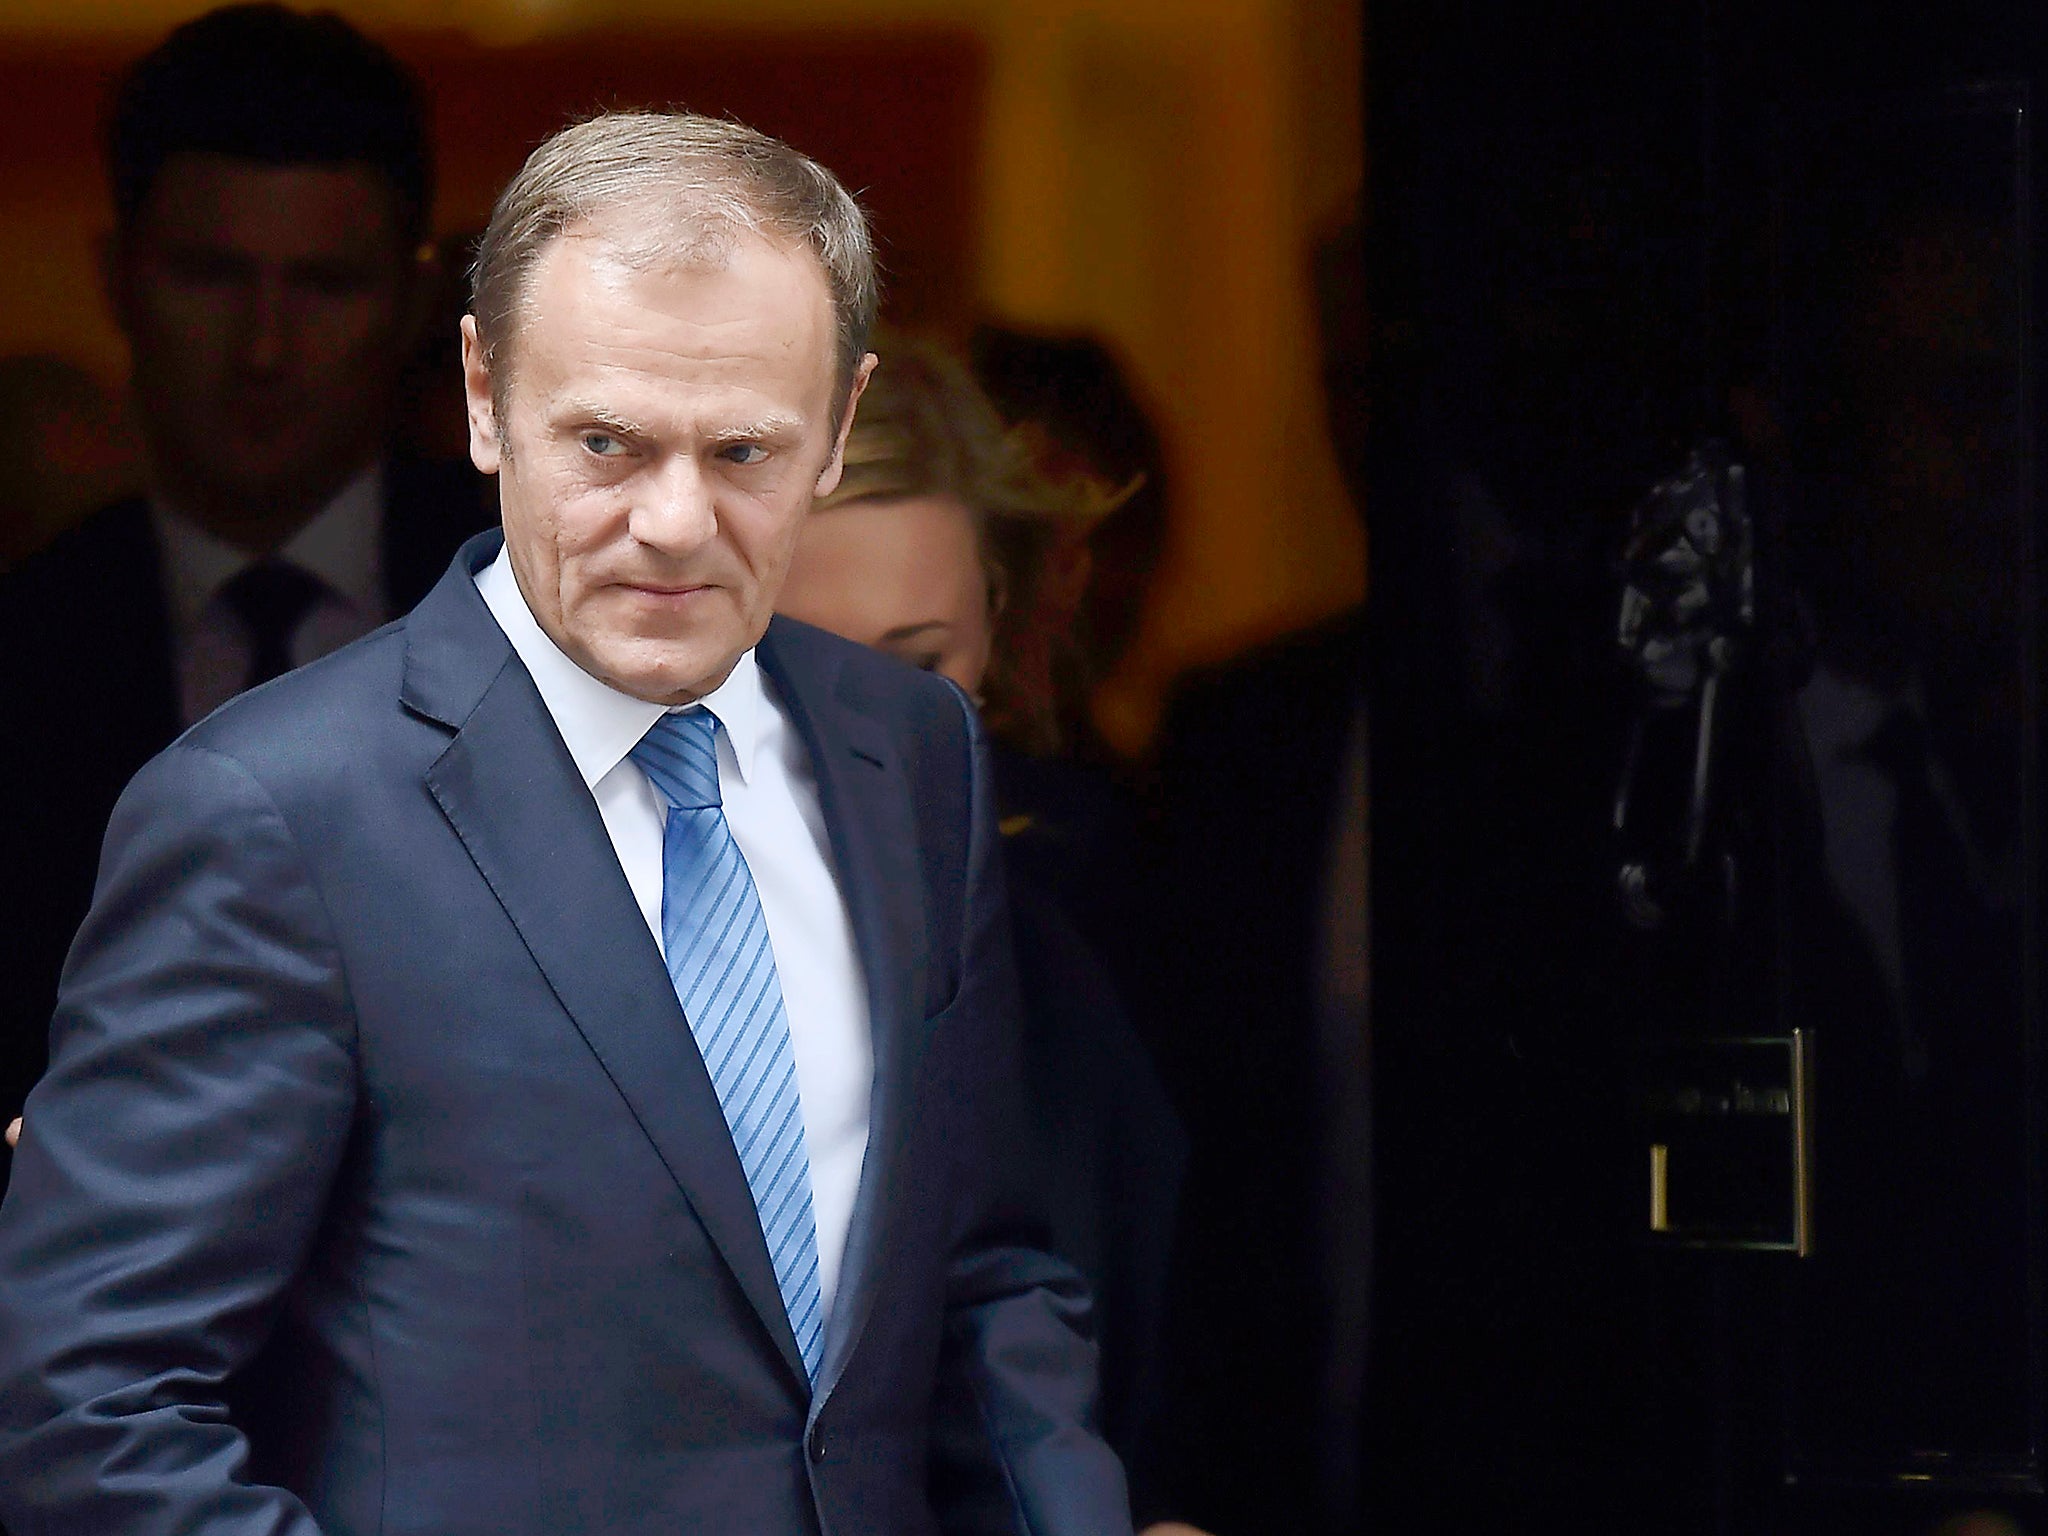 Donald Tusk, the president of the European Council, is known as a pragmatist